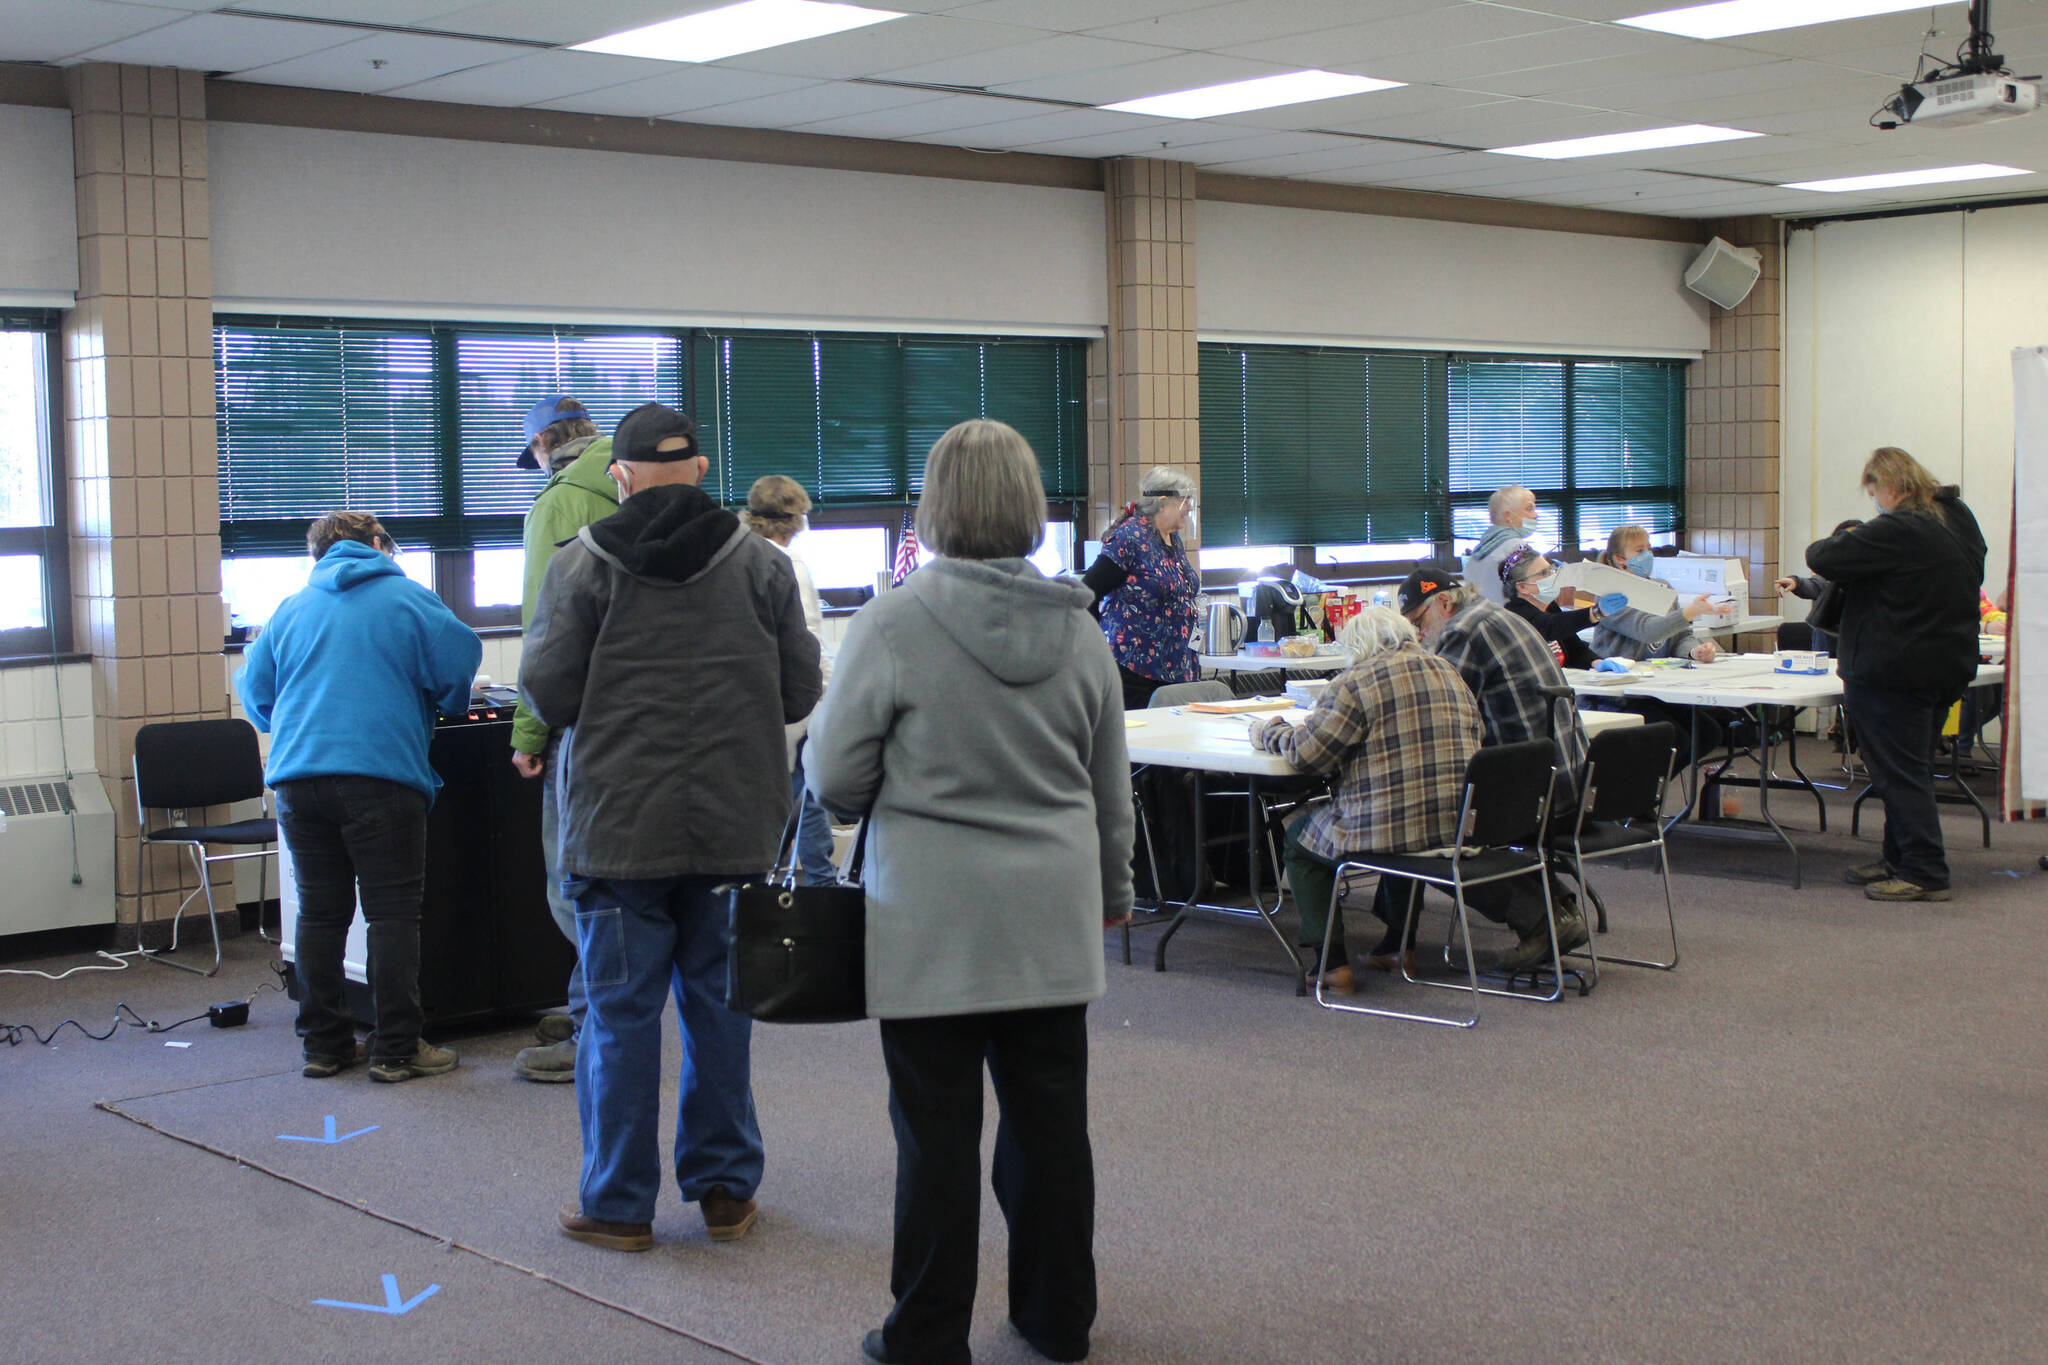 Voters line up to put their ballots in a ballot machine at the Soldotna Regional Sports Complex on Tuesday, Nov. 3 in Soldotna, Alaska. (Photo by Ashlyn O’Hara/Peninsula Clarion)